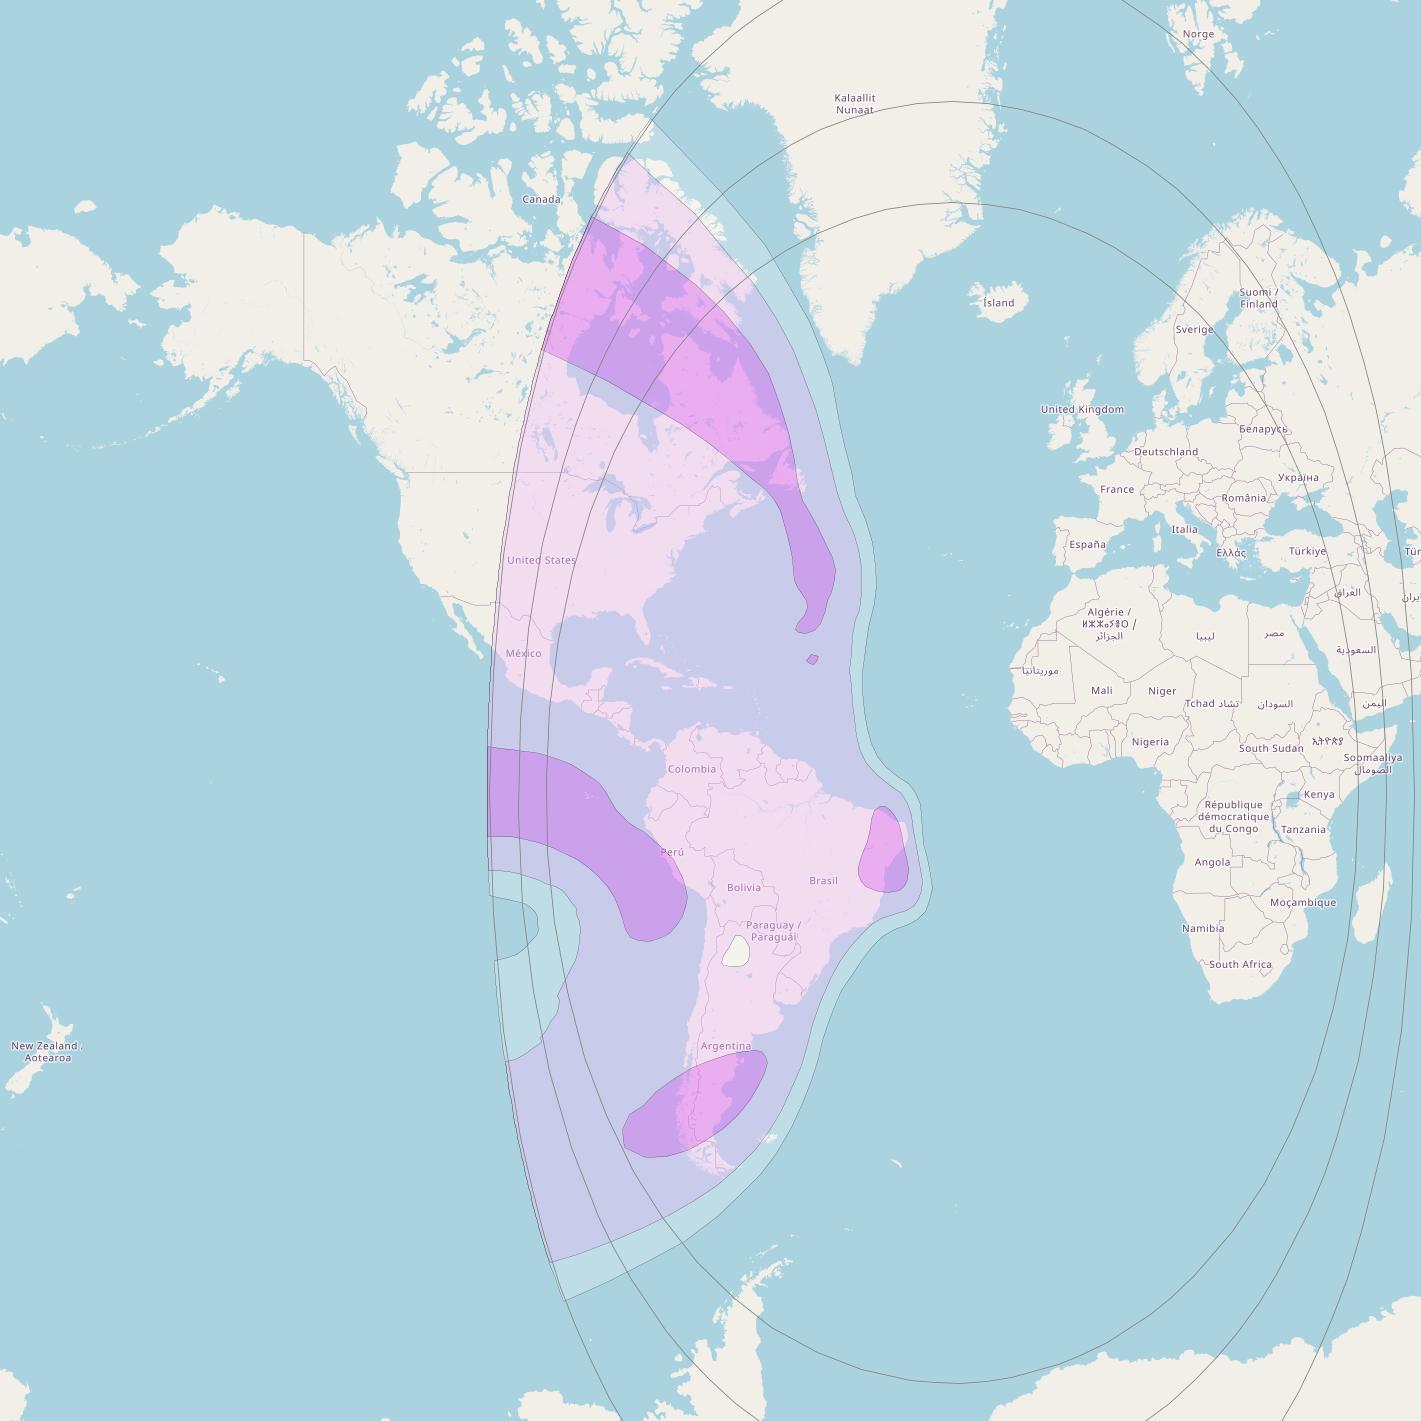 Intelsat 901 + MEV1 at 27° W downlink C-band West Hemi beam coverage map